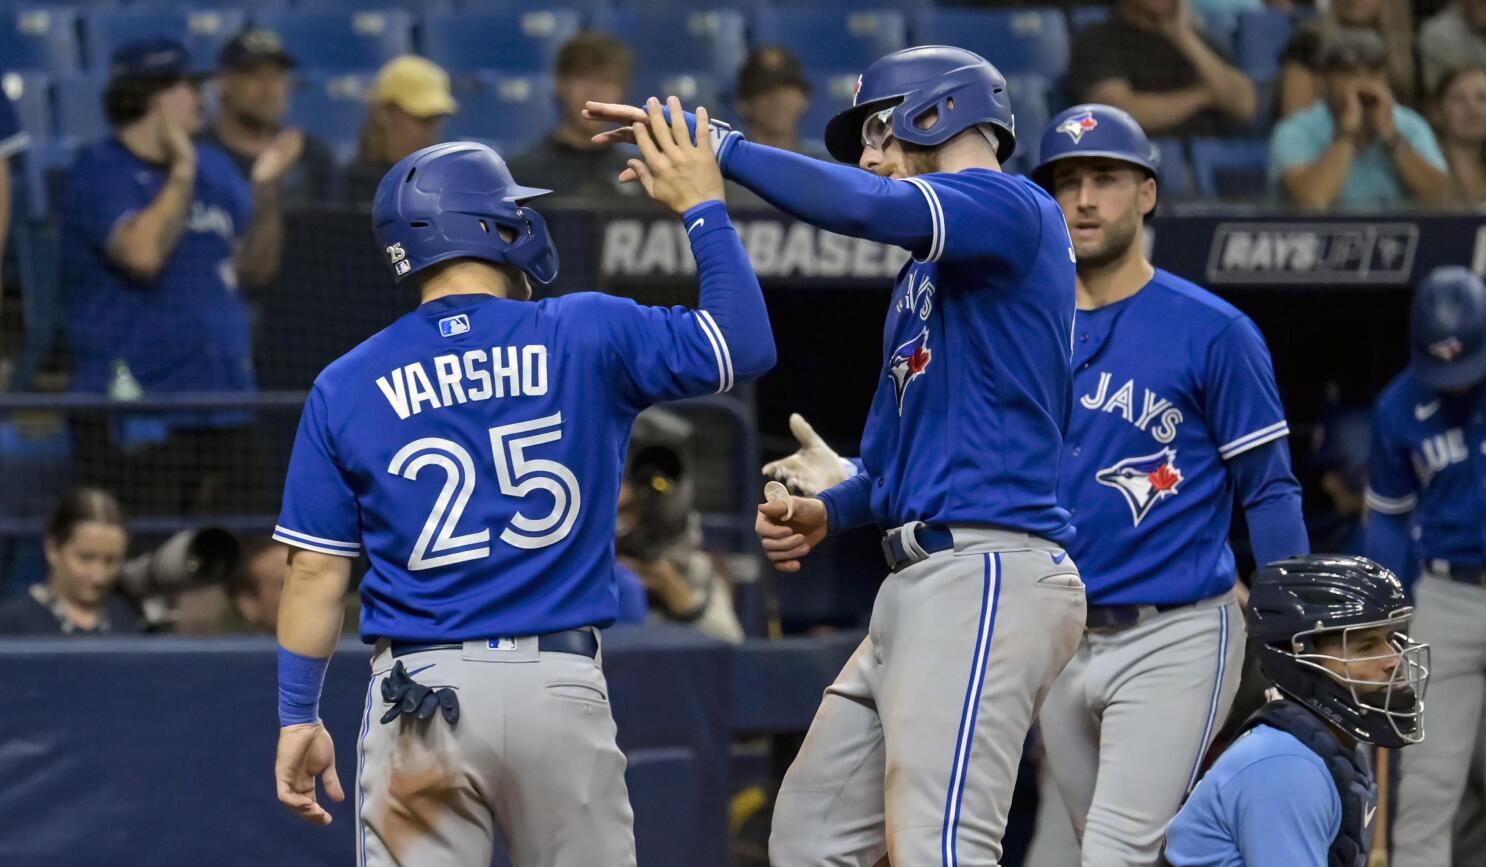 Maritime baseball fans set to cheer on the Blue Jays